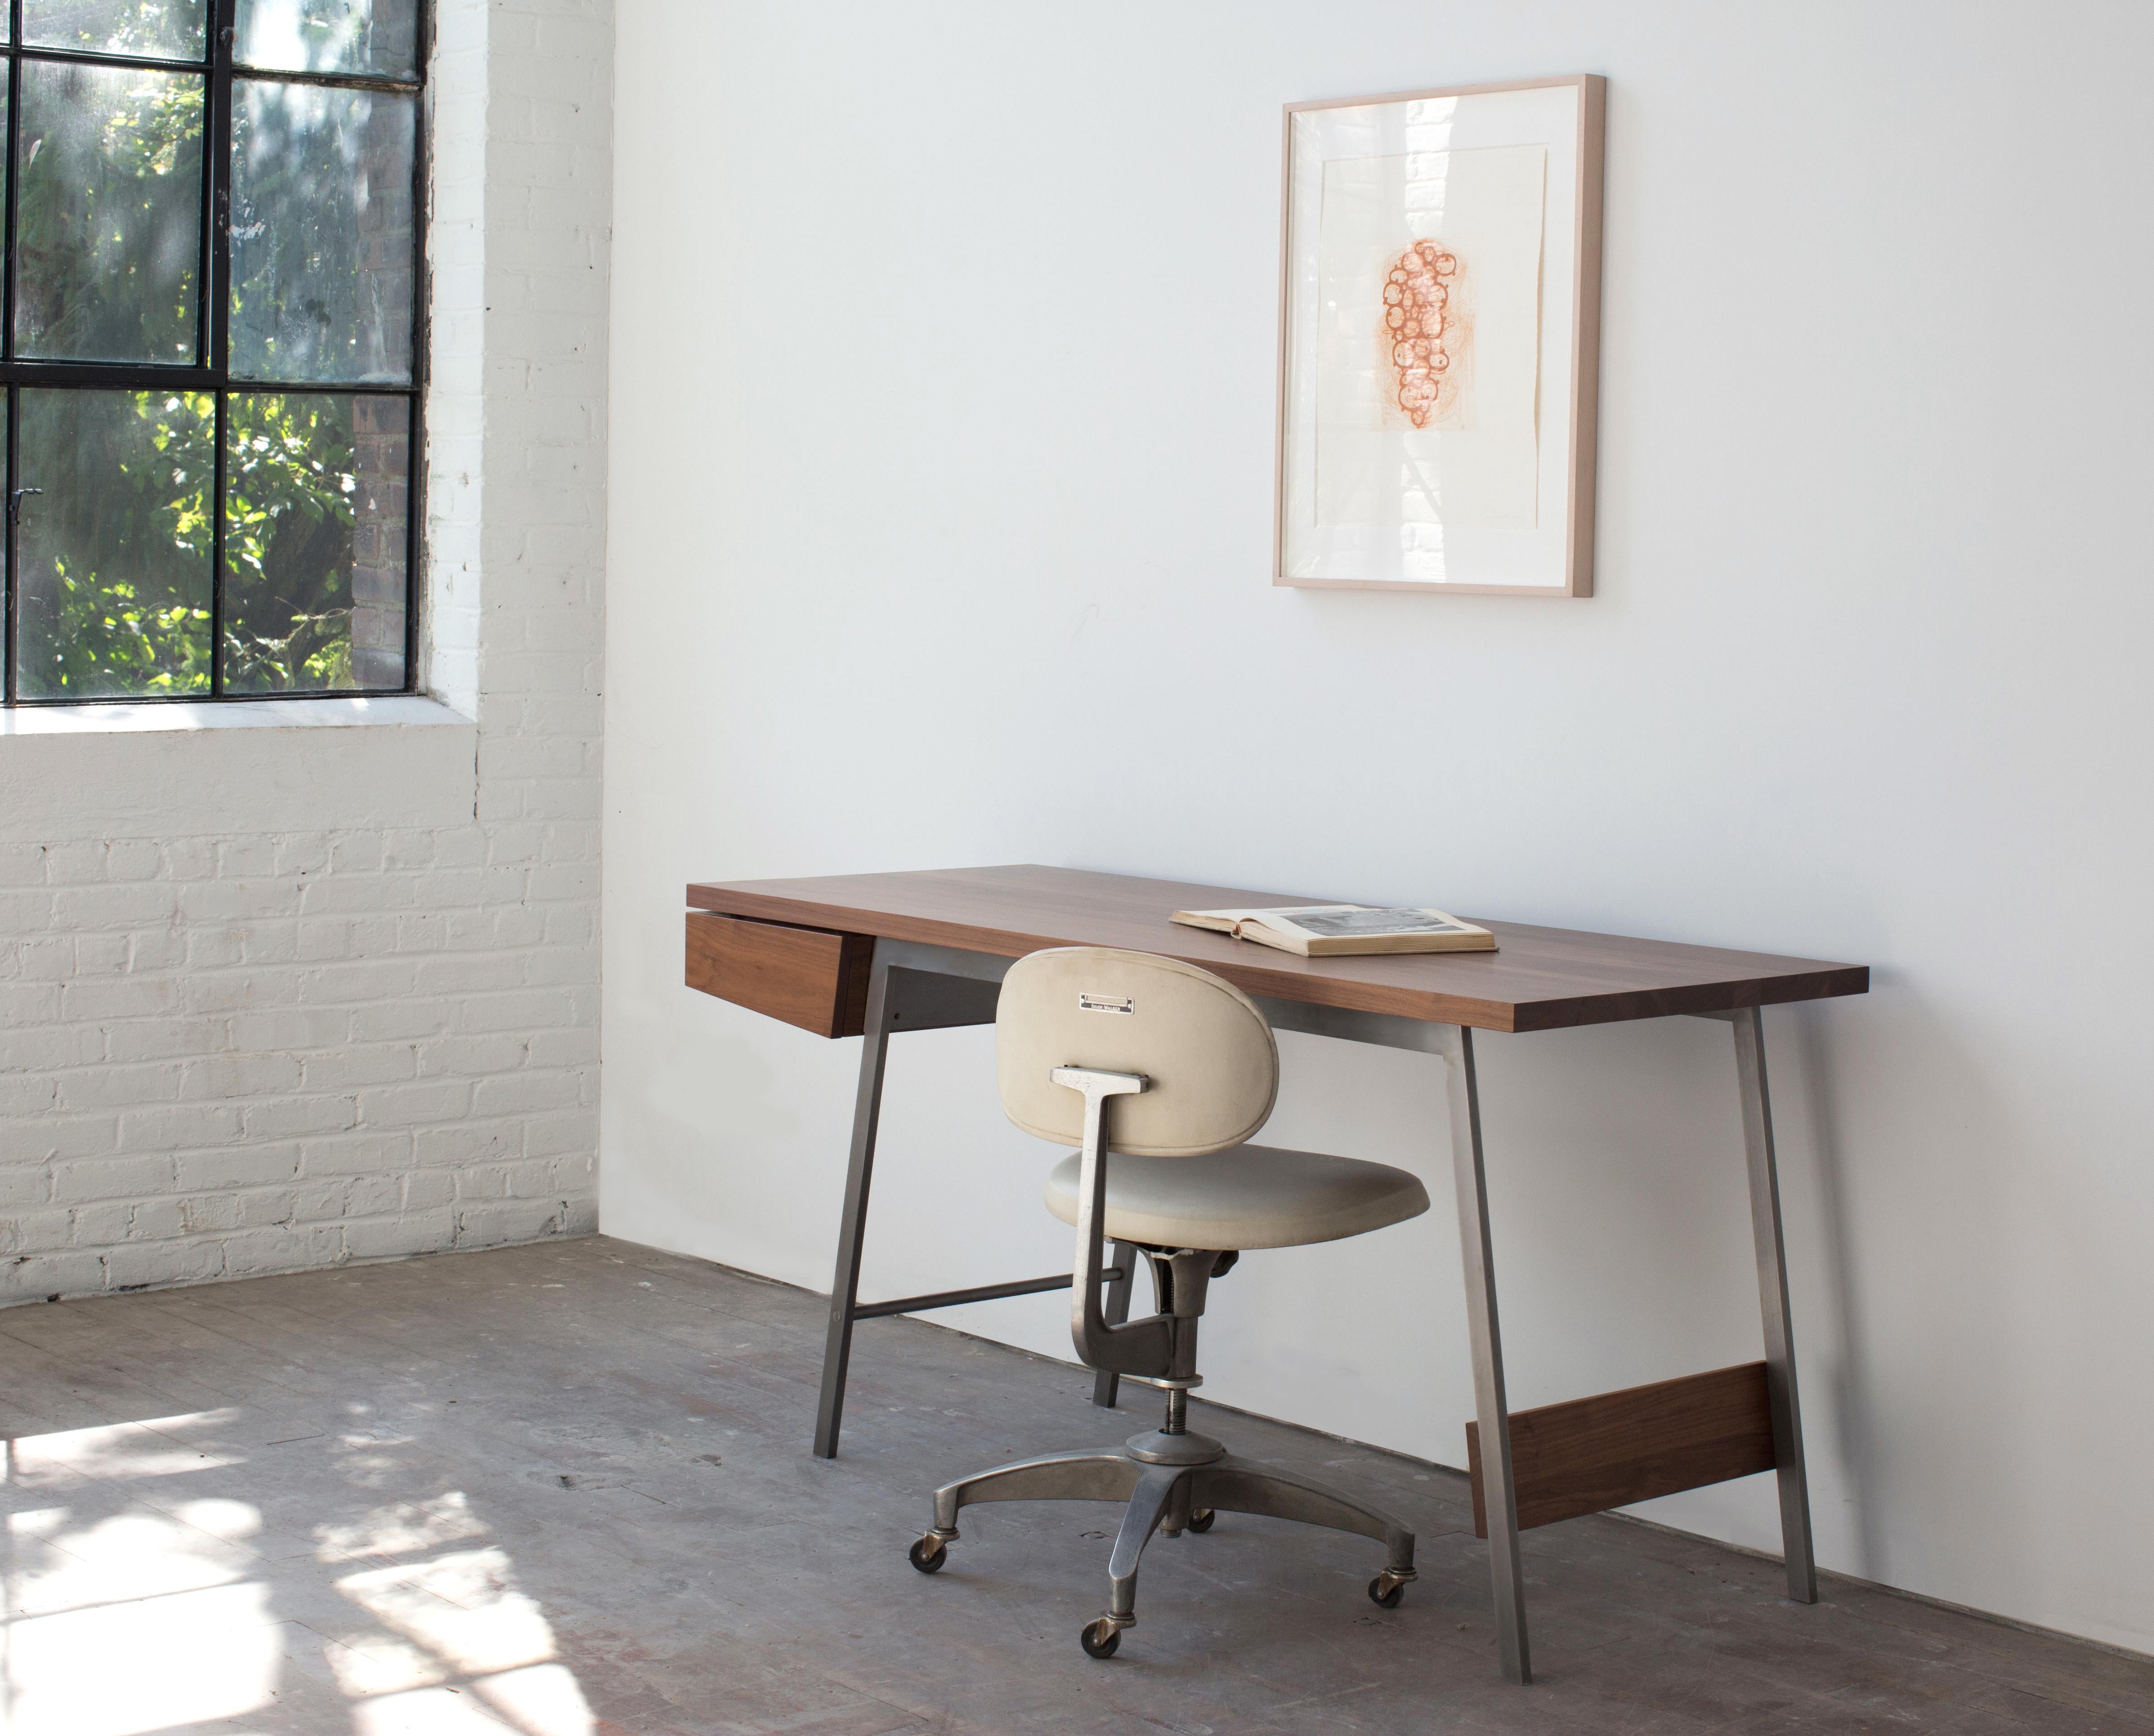 Spare, refined, and meticulously handcrafted of solid hardwoods and steel, the AD7 desk is distinguished by superb detailing, the finest materials and timeless design. The composition plays with the relationship between positive and negative space,